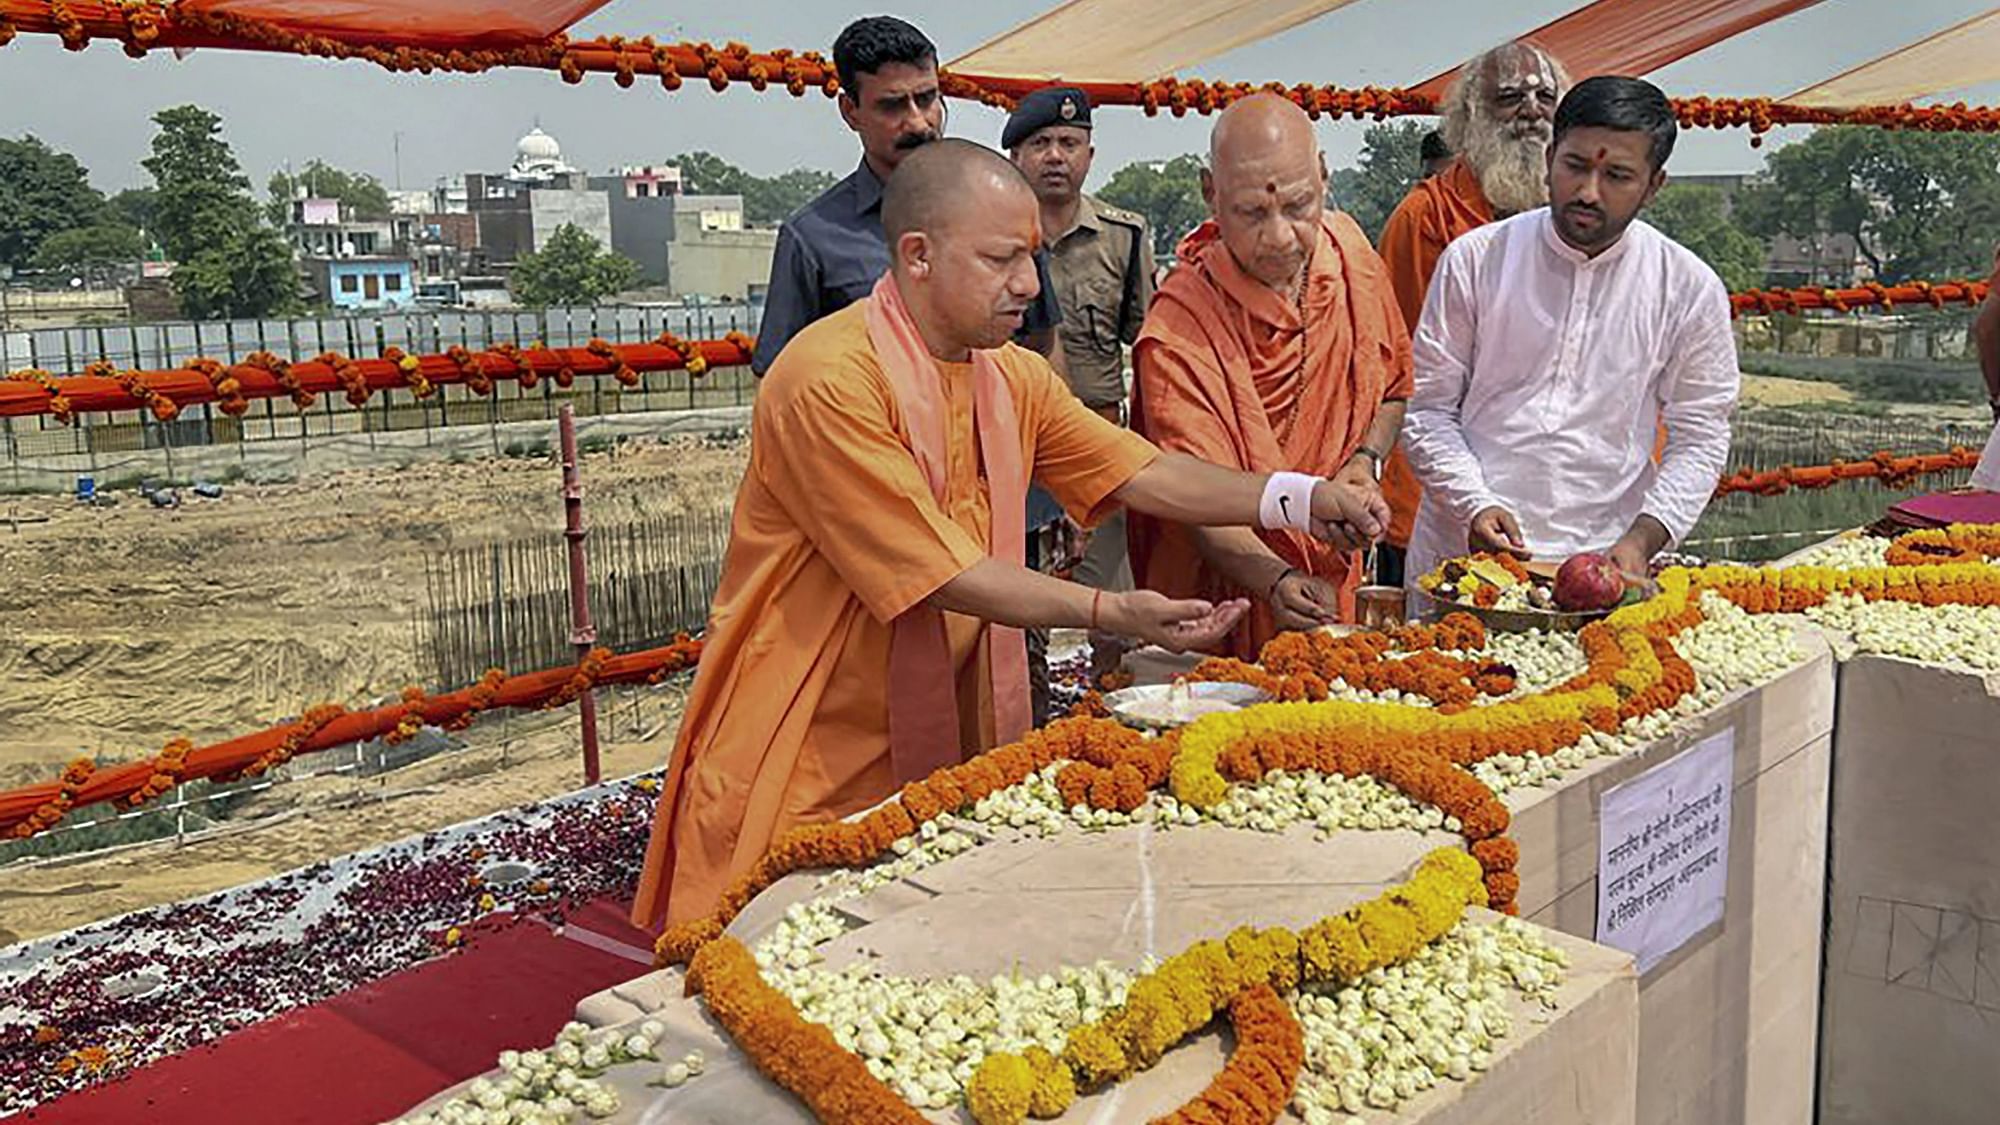 <div class="paragraphs"><p>Uttar Pradesh Chief Minister Yogi Adityanath&nbsp;laid the foundation stone for the sanctum sanctorum of the <a href="https://www.thequint.com/news/breaking-news/ayodhya-ram-temple-to-open-for-devotees-at-the-end-of-2023">Ram Mandir</a> in <a href="https://www.thequint.com/videos/news-videos/how-ayodhya-has-changed-in-two-years-since-supreme-court-verdict-on-ram-mandir">Ayodhya</a> on Wednesday, 1 June.</p></div>